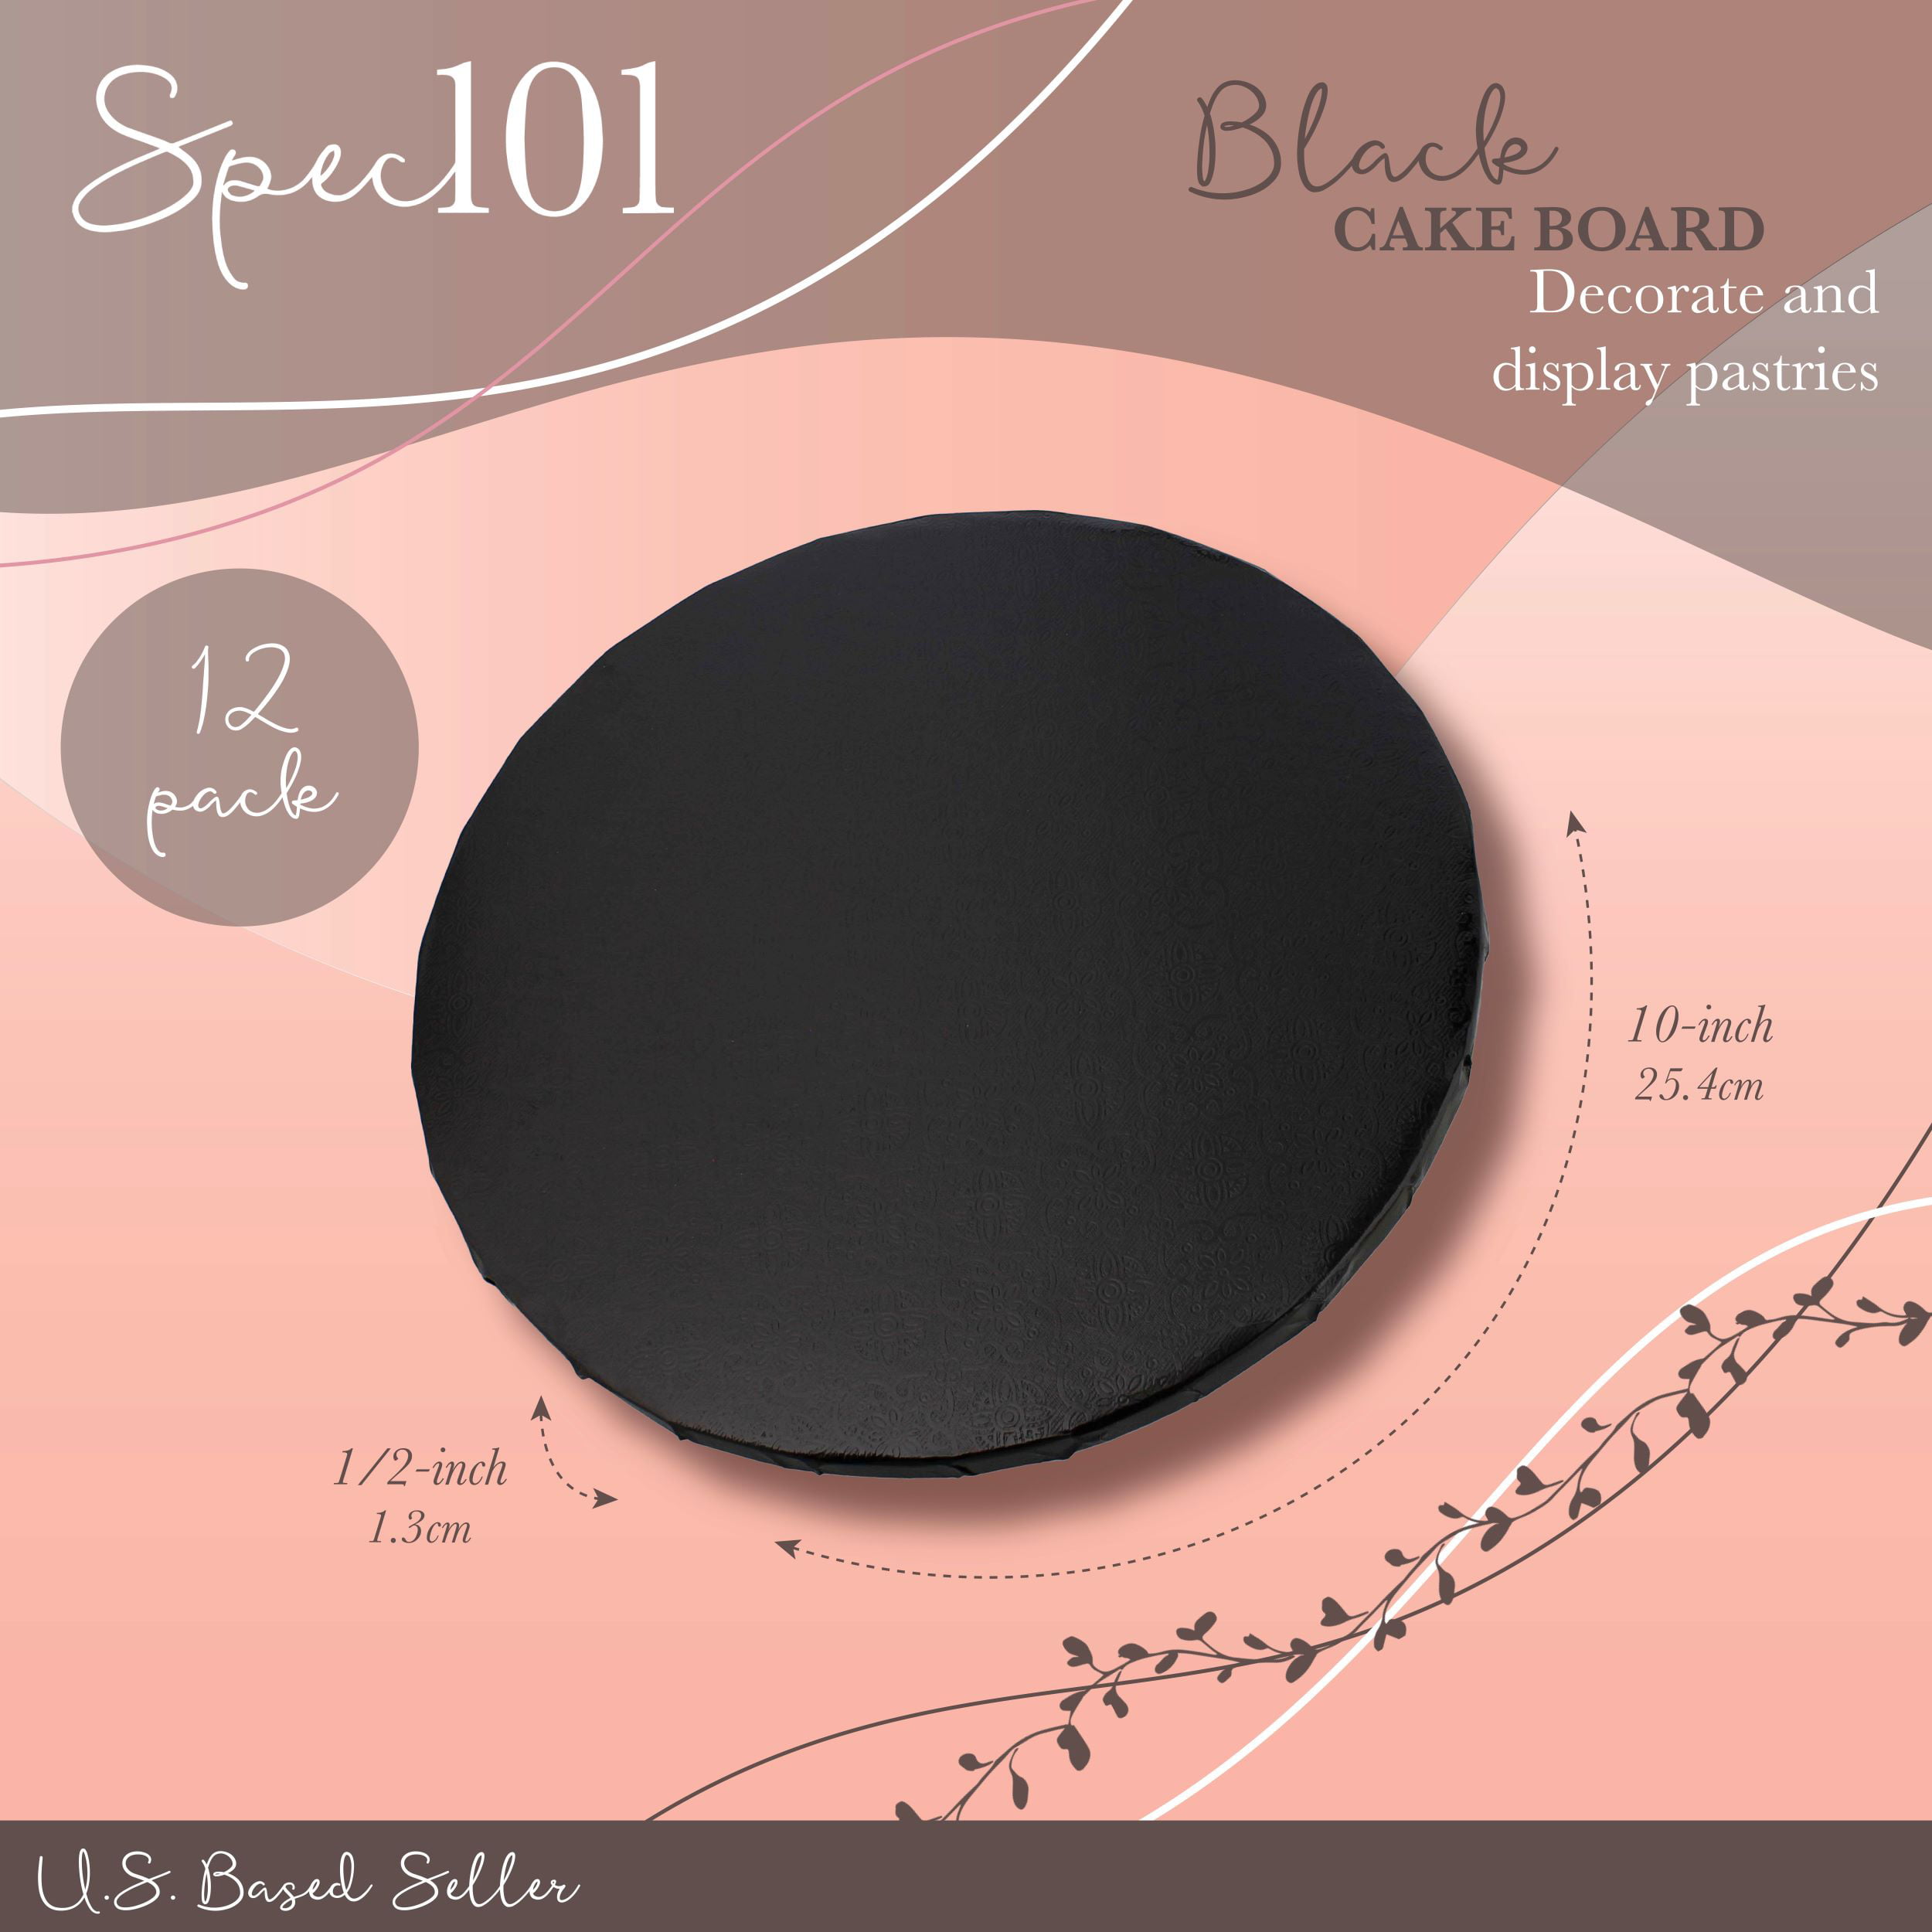 Spec101 Rose Gold Cake Drum 10 inch Set - 12Pk Thick Square Cake Board Drums, Pink